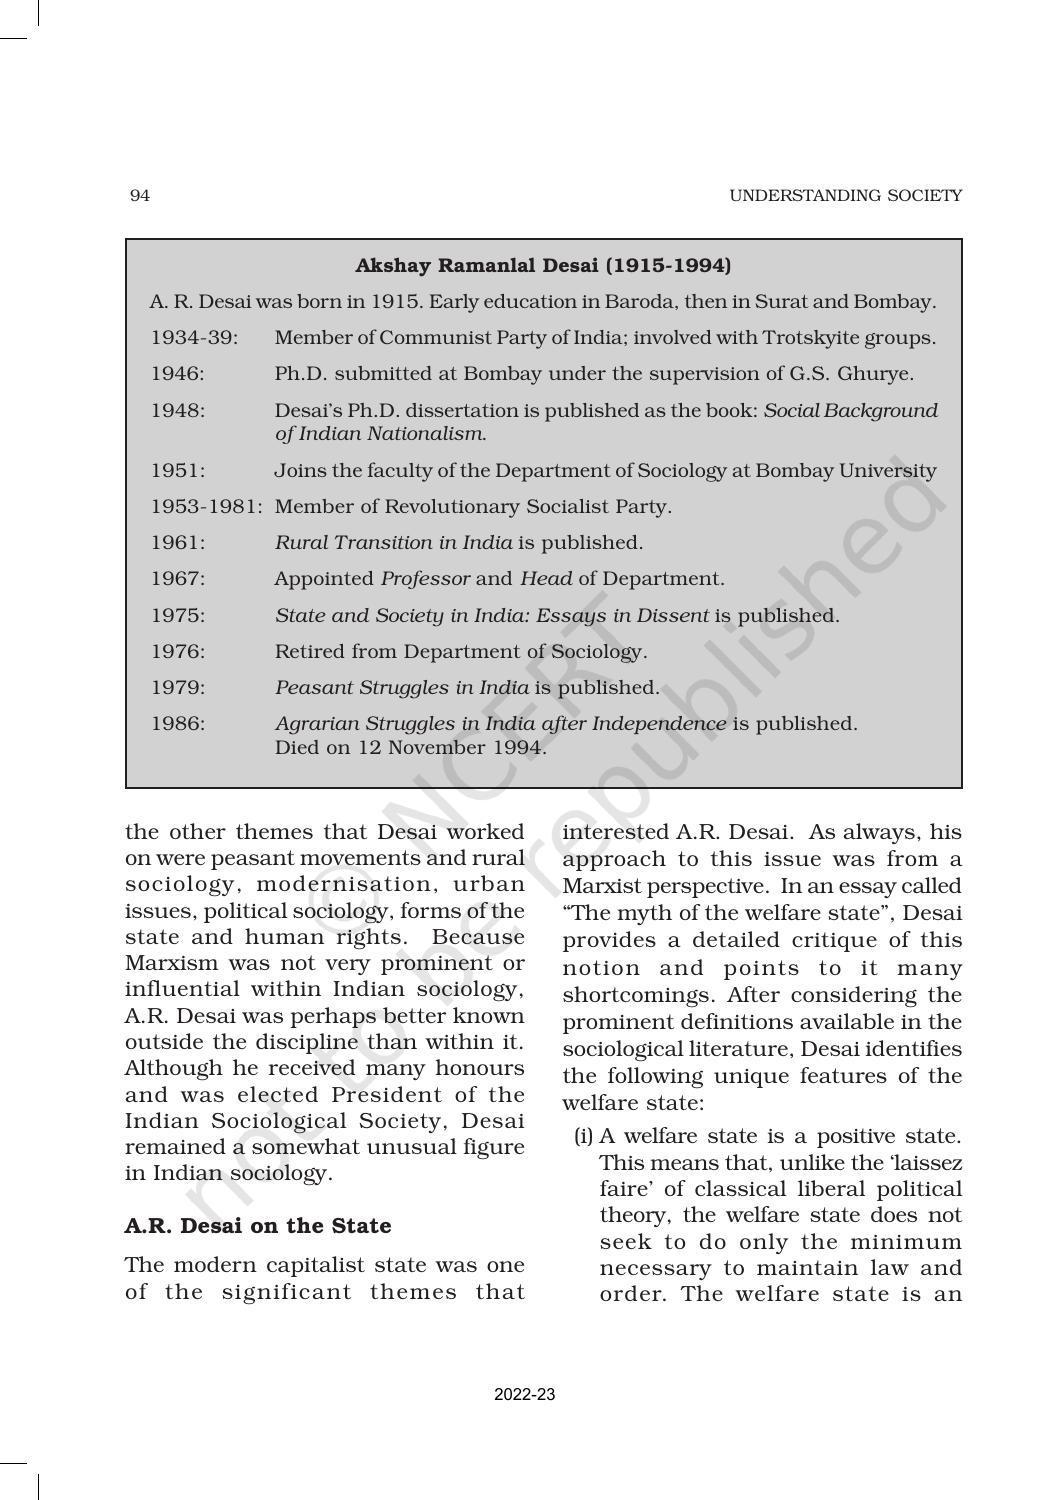 NCERT Book for Class 11 Sociology (Part-II) Chapter 5 Indian Sociologists - Page 12